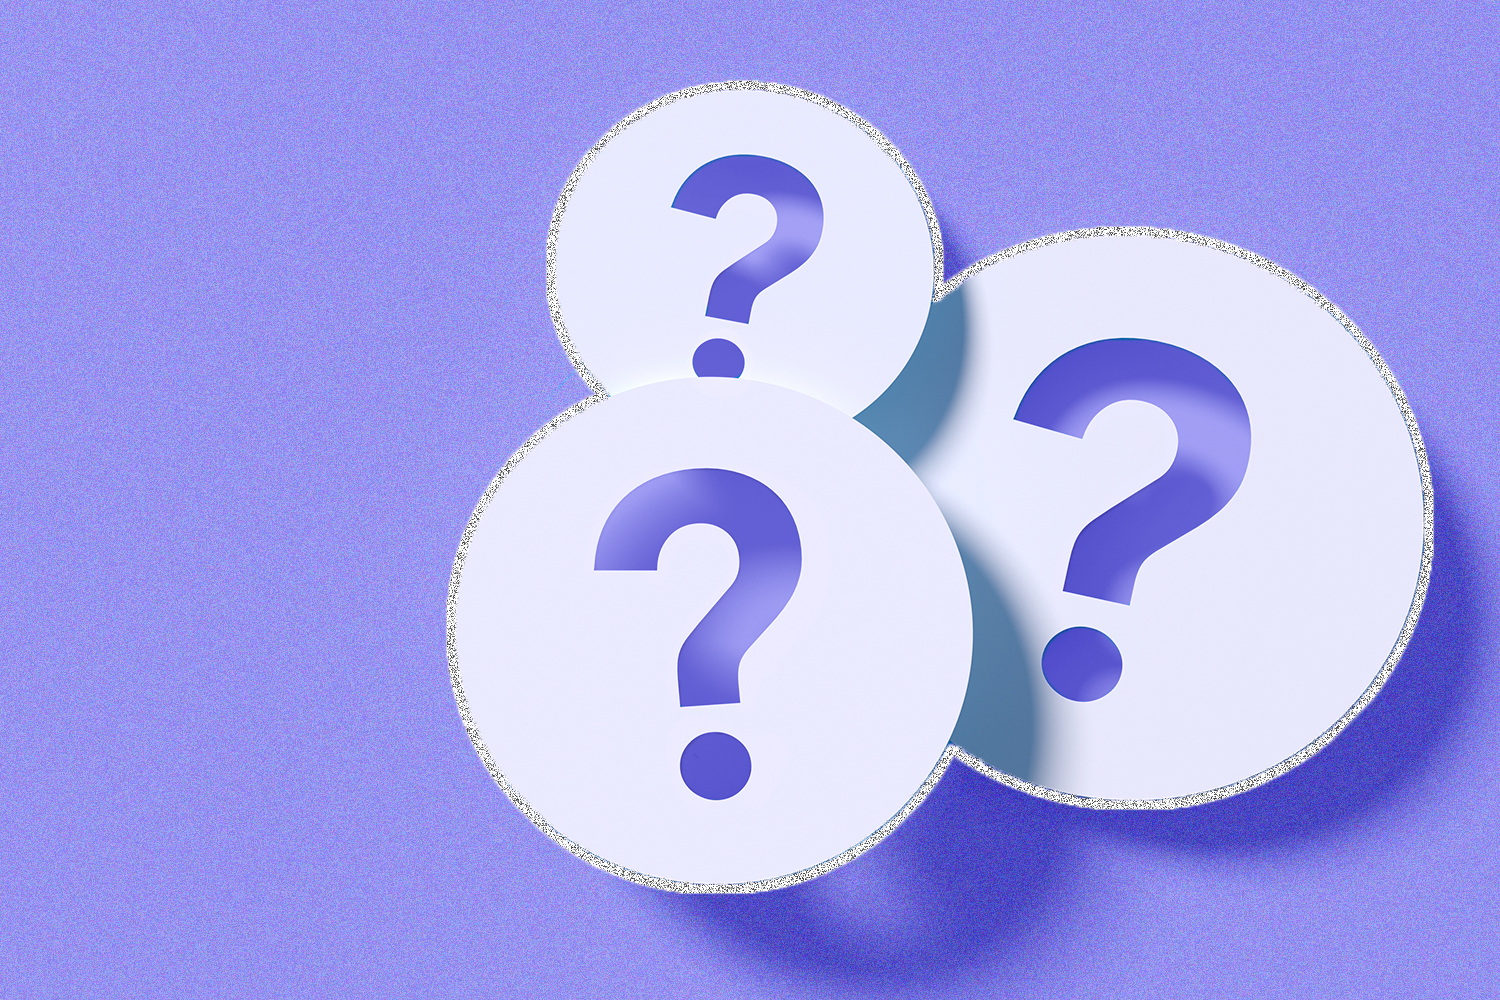 Three round white shapes each with a question mark in them, on a purple background